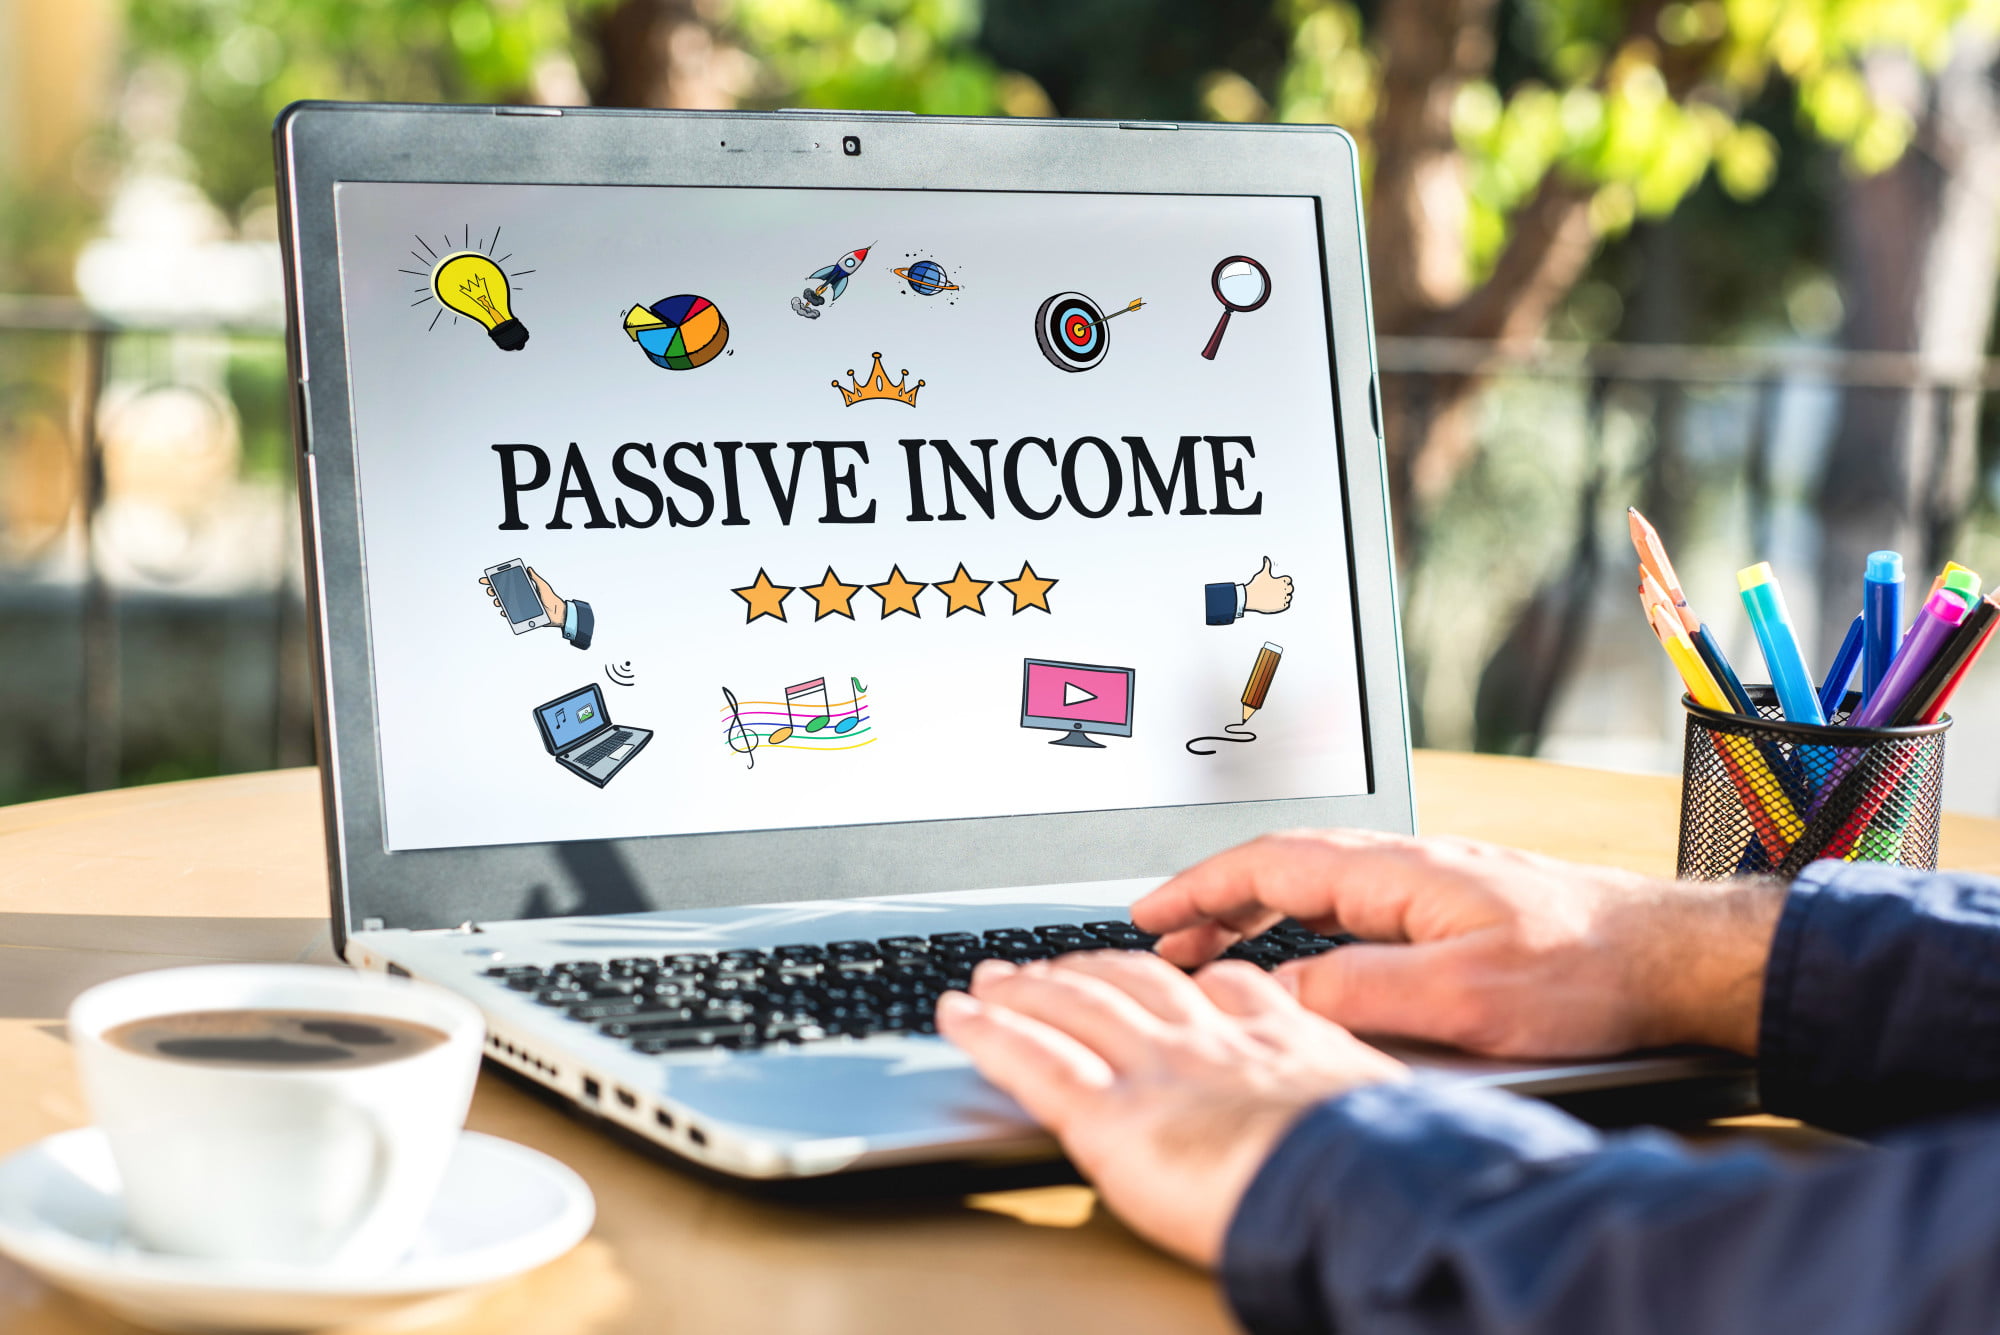 Making money while you sleep is one of the best feelings in the world. Keep reading for some ideas on how to build passive income.